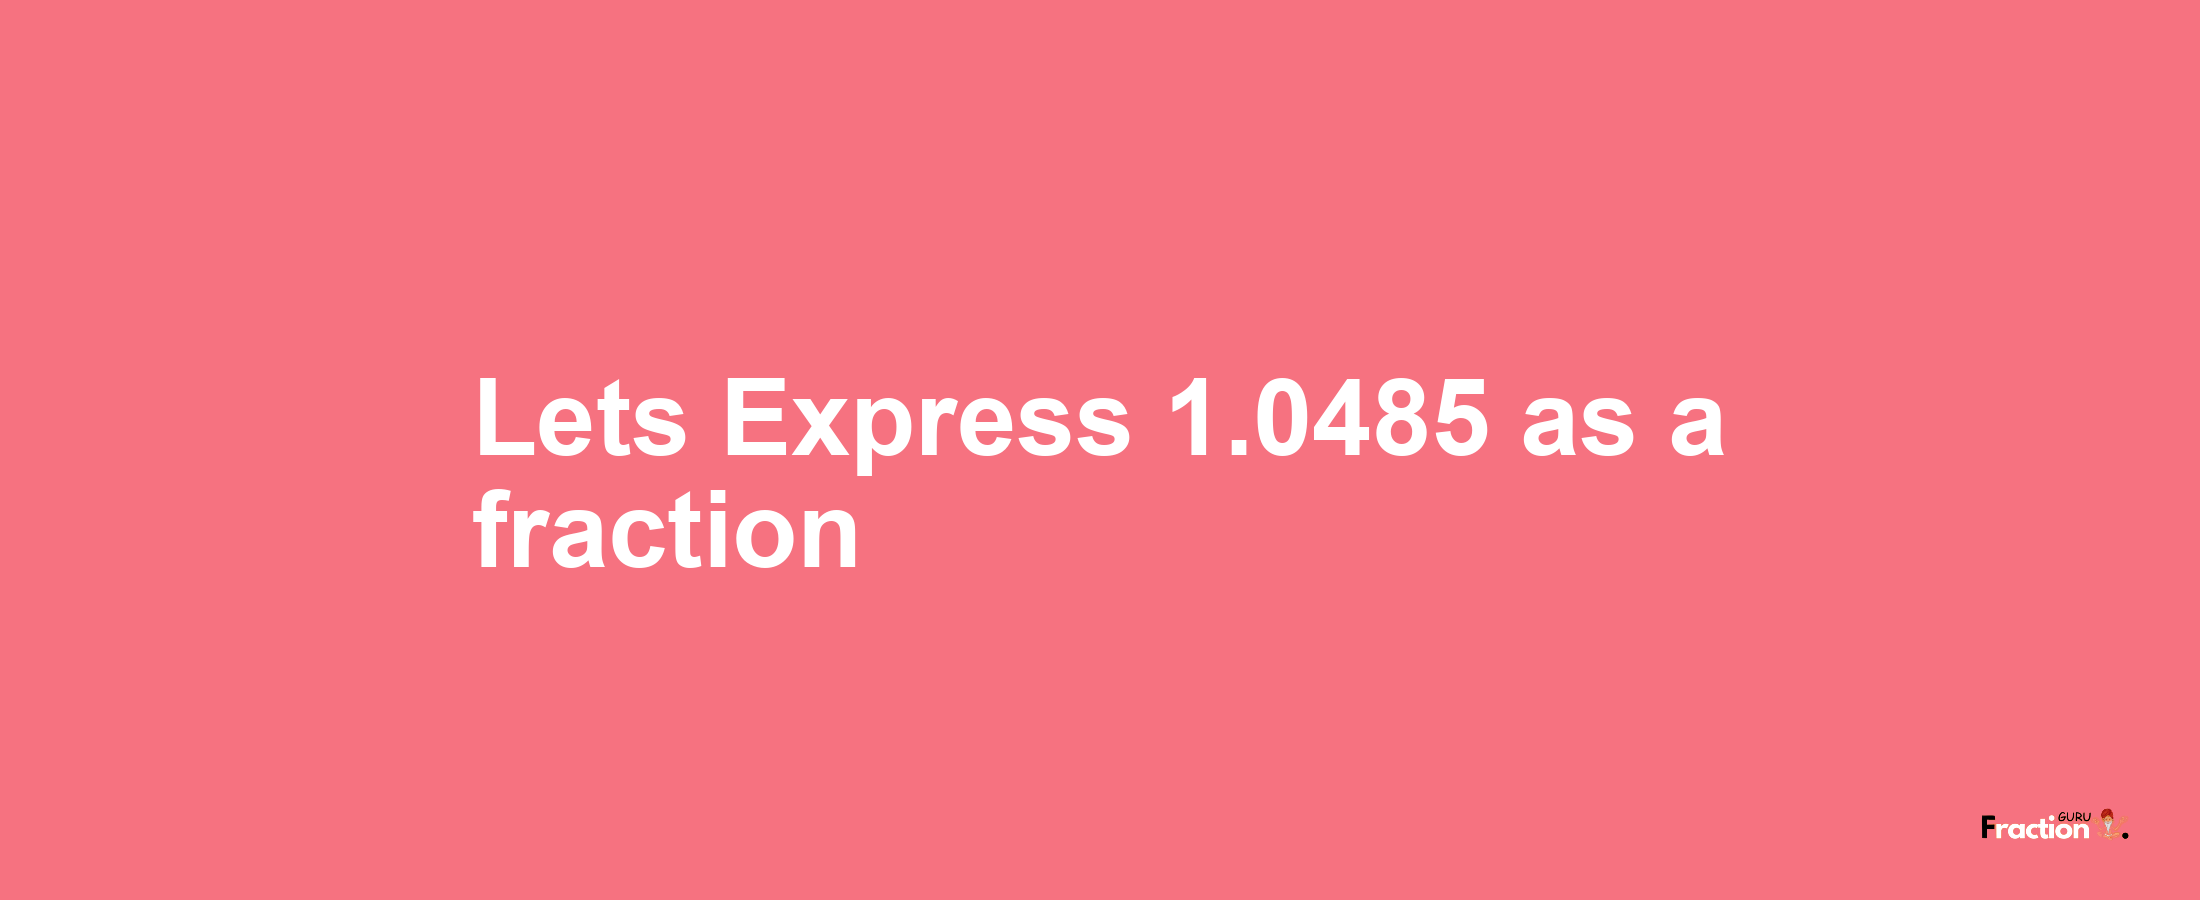 Lets Express 1.0485 as afraction